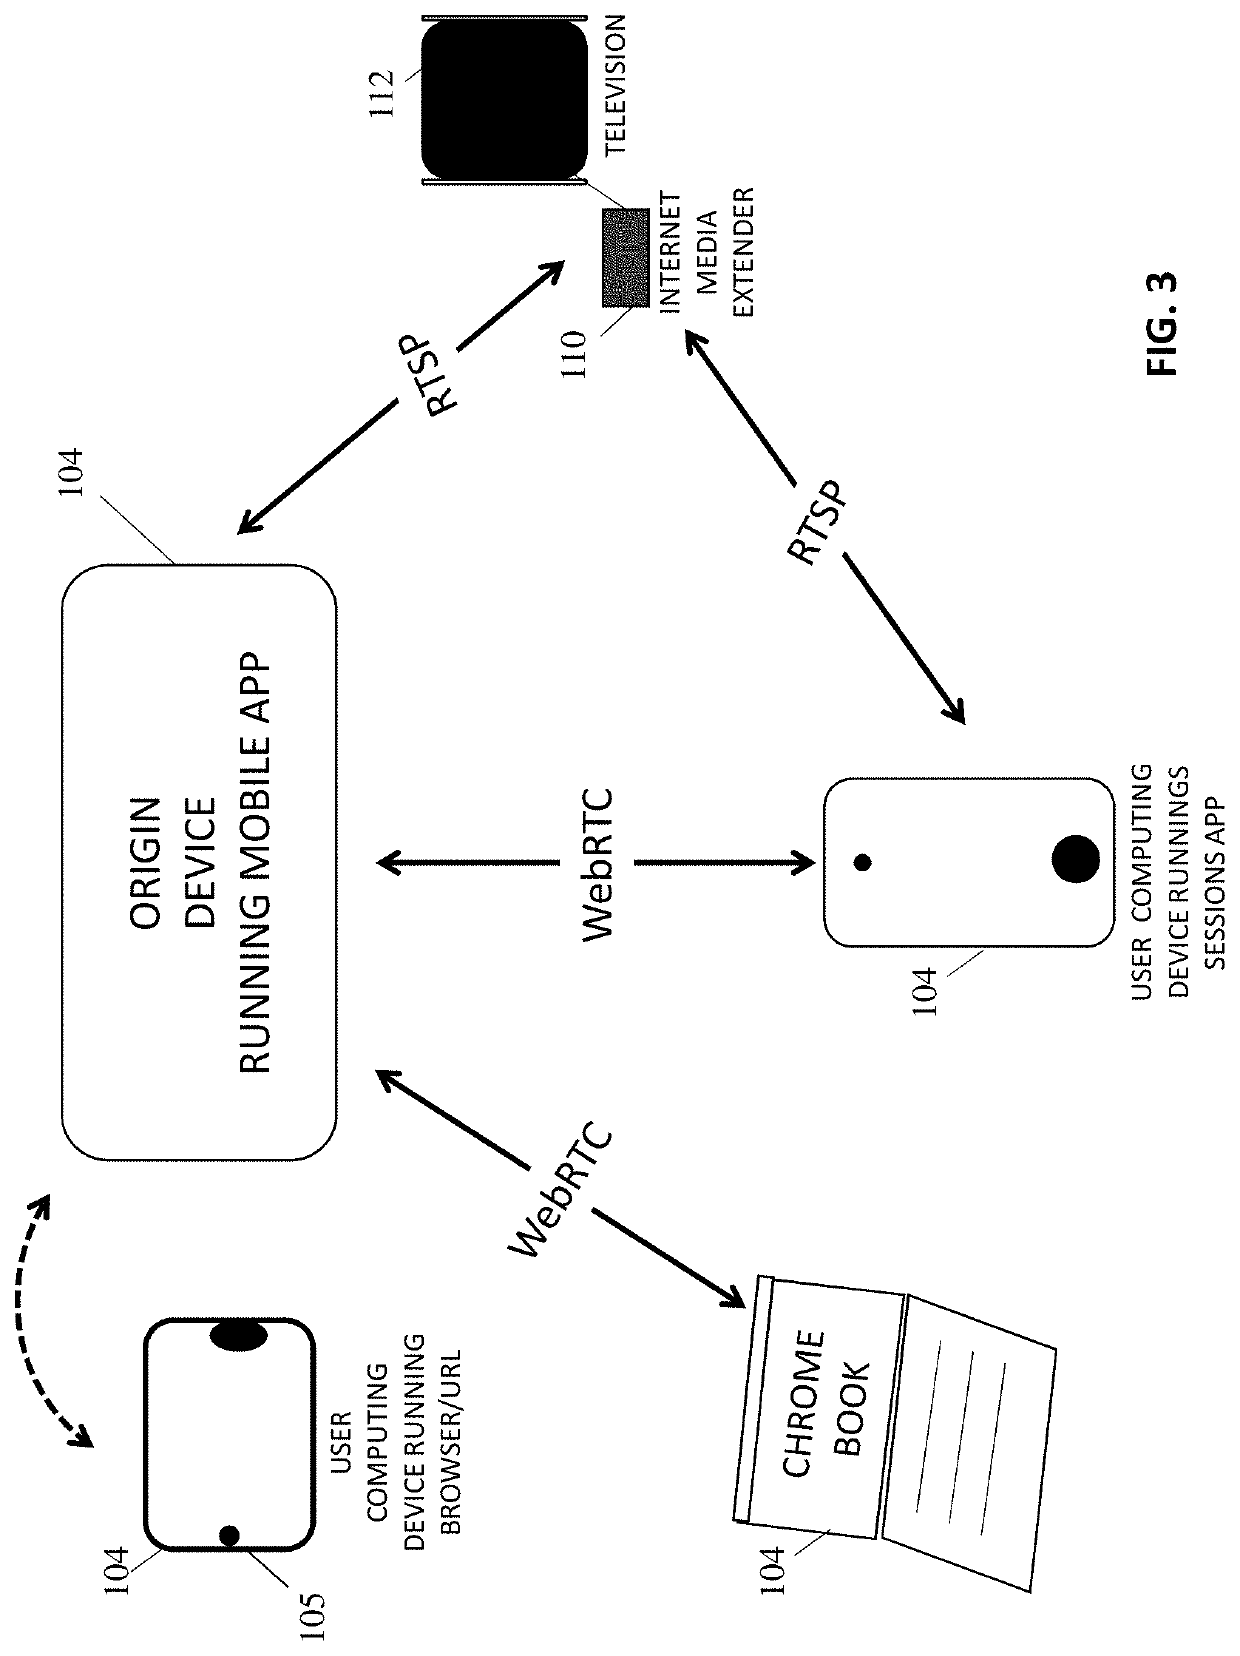 Augmented reality conferencing system and method